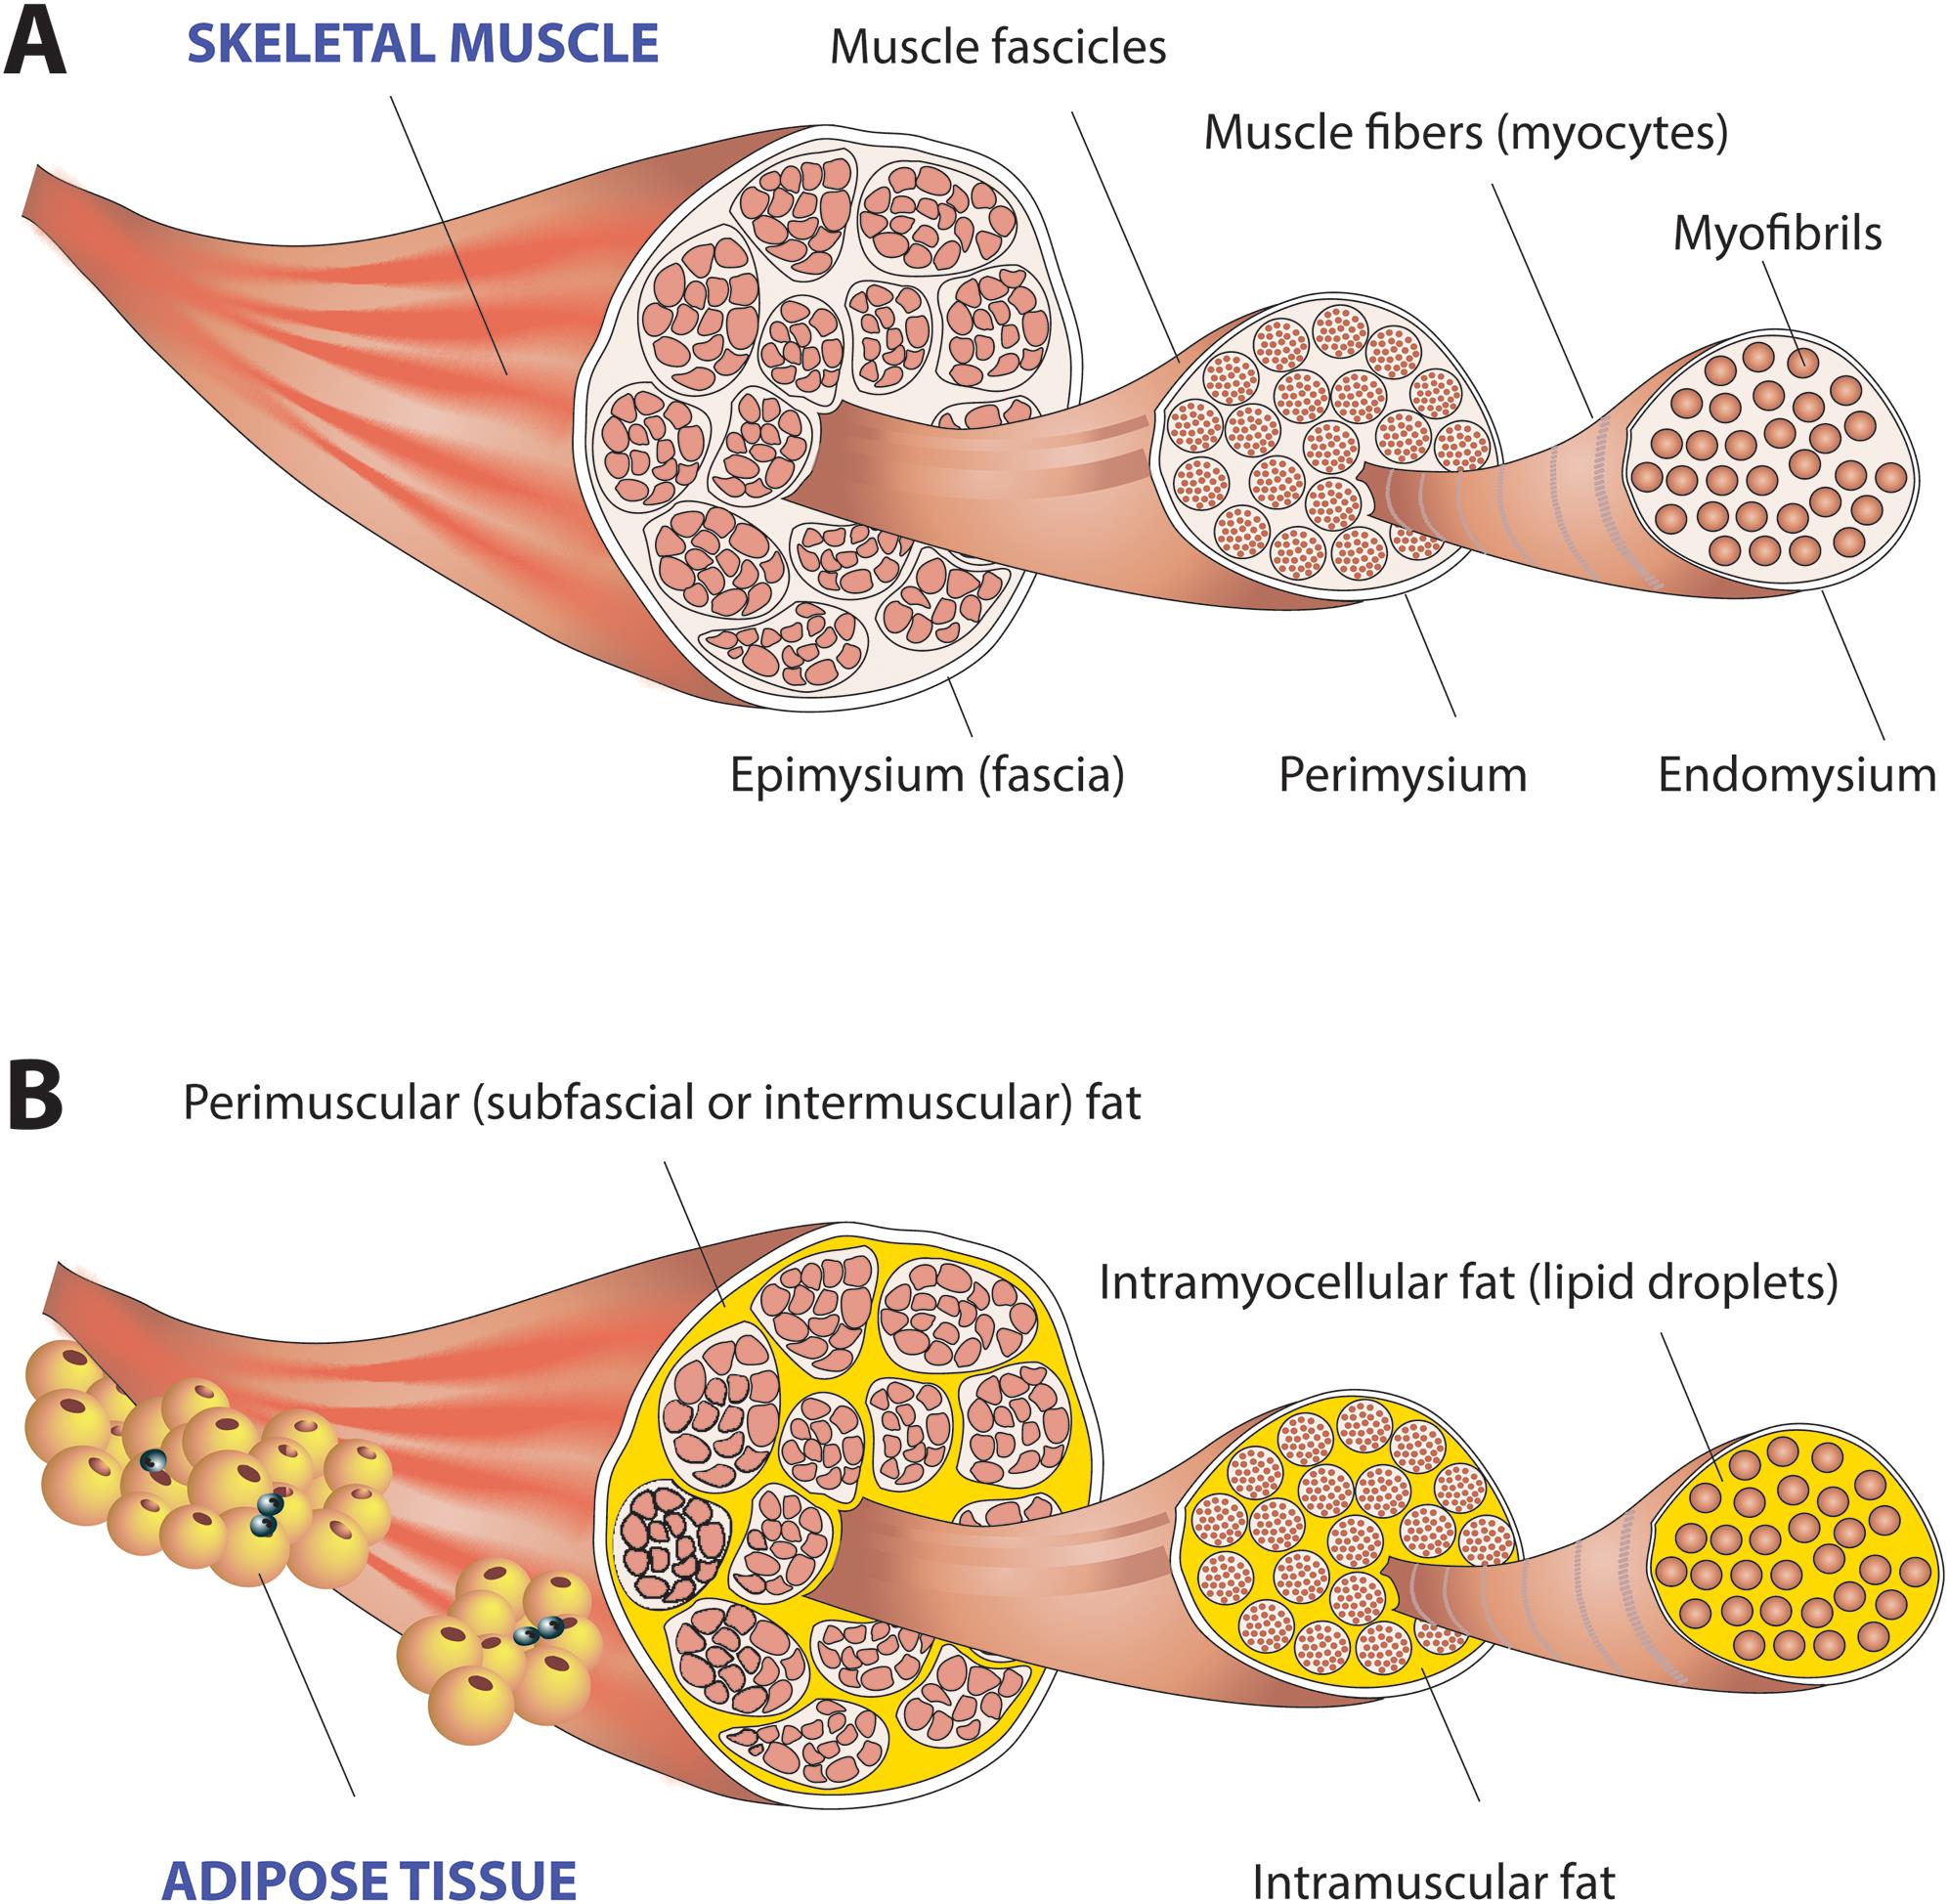 <bold>Skeletal muscle and fat deposition.</bold> (A) Skeletal muscle is made up of intramyocellular myofibrils, muscle fibers and fascicles bound together by successively thicker connective tissue layers as endomysium, perimysium, and epimysium. (B) Skeletal muscle fat may be classified as intramyocellular (lipid droplets filling the cytoplasm between myofibrils of elongated myocytes) and extramyocellular components. Adipocytes may infiltrate muscle fibers (intramuscular fat), fascicles (intermuscular fat), or exist around the epimysium as extramuscular fat depots of adipose tissue.